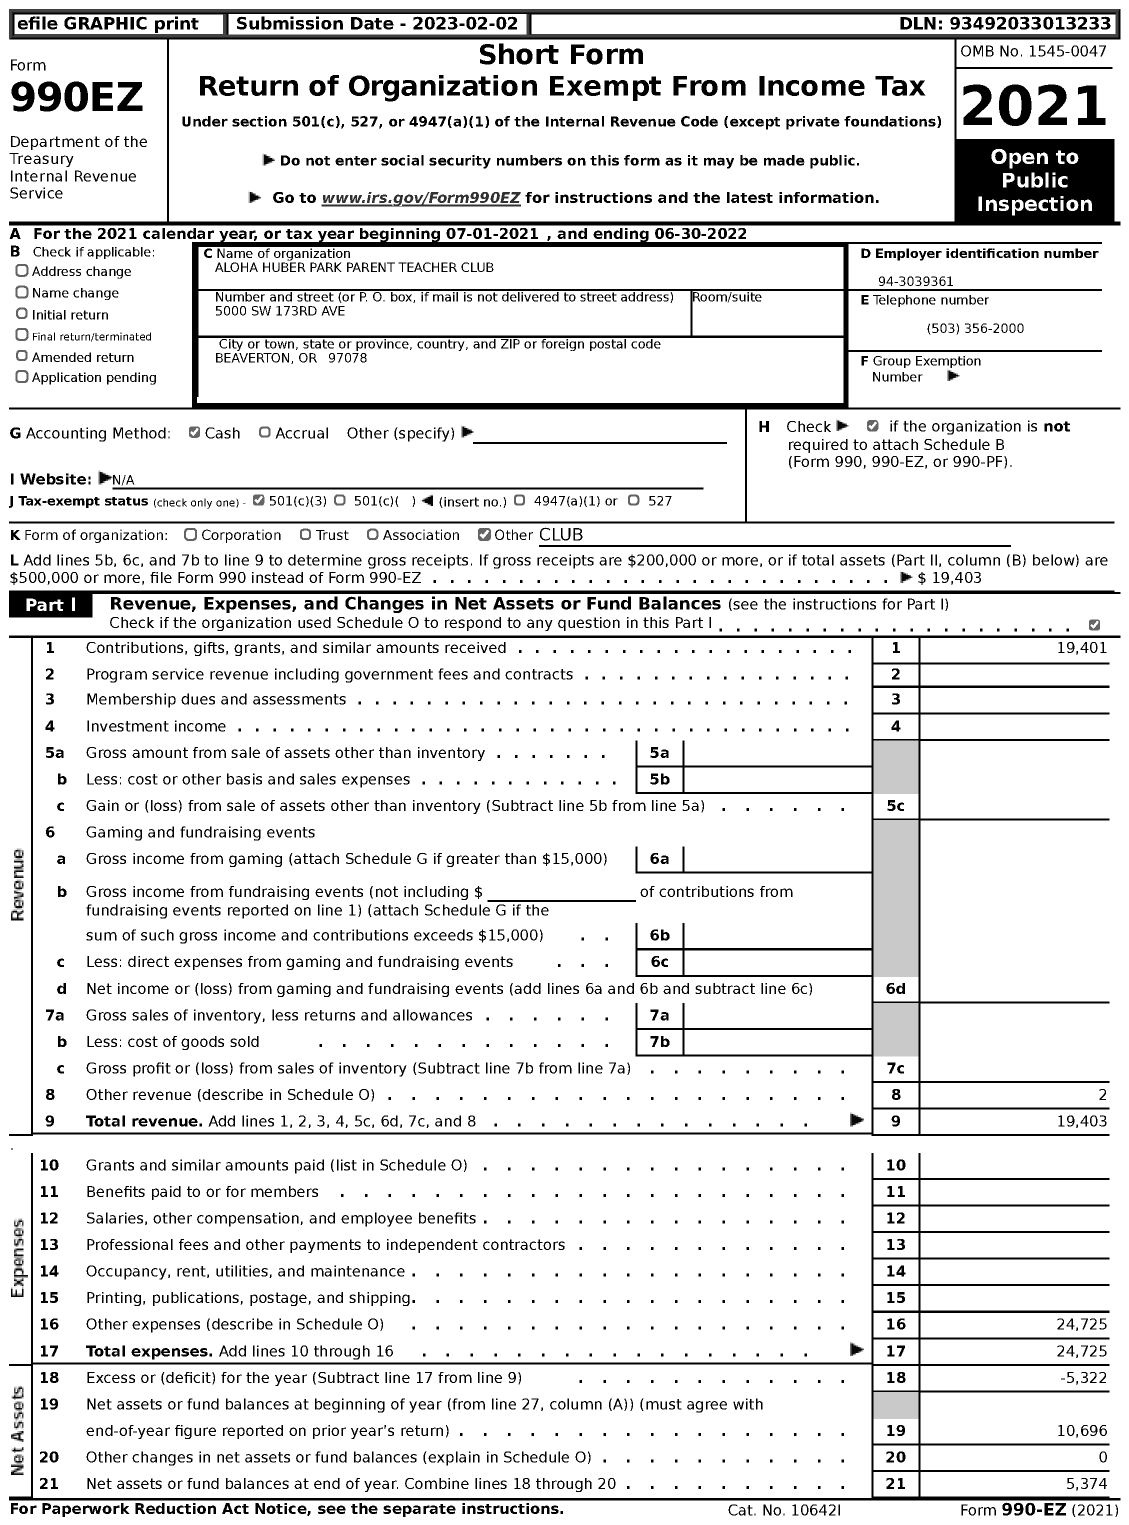 Image of first page of 2021 Form 990EZ for Aloha Huber Park Parent Teacher Club